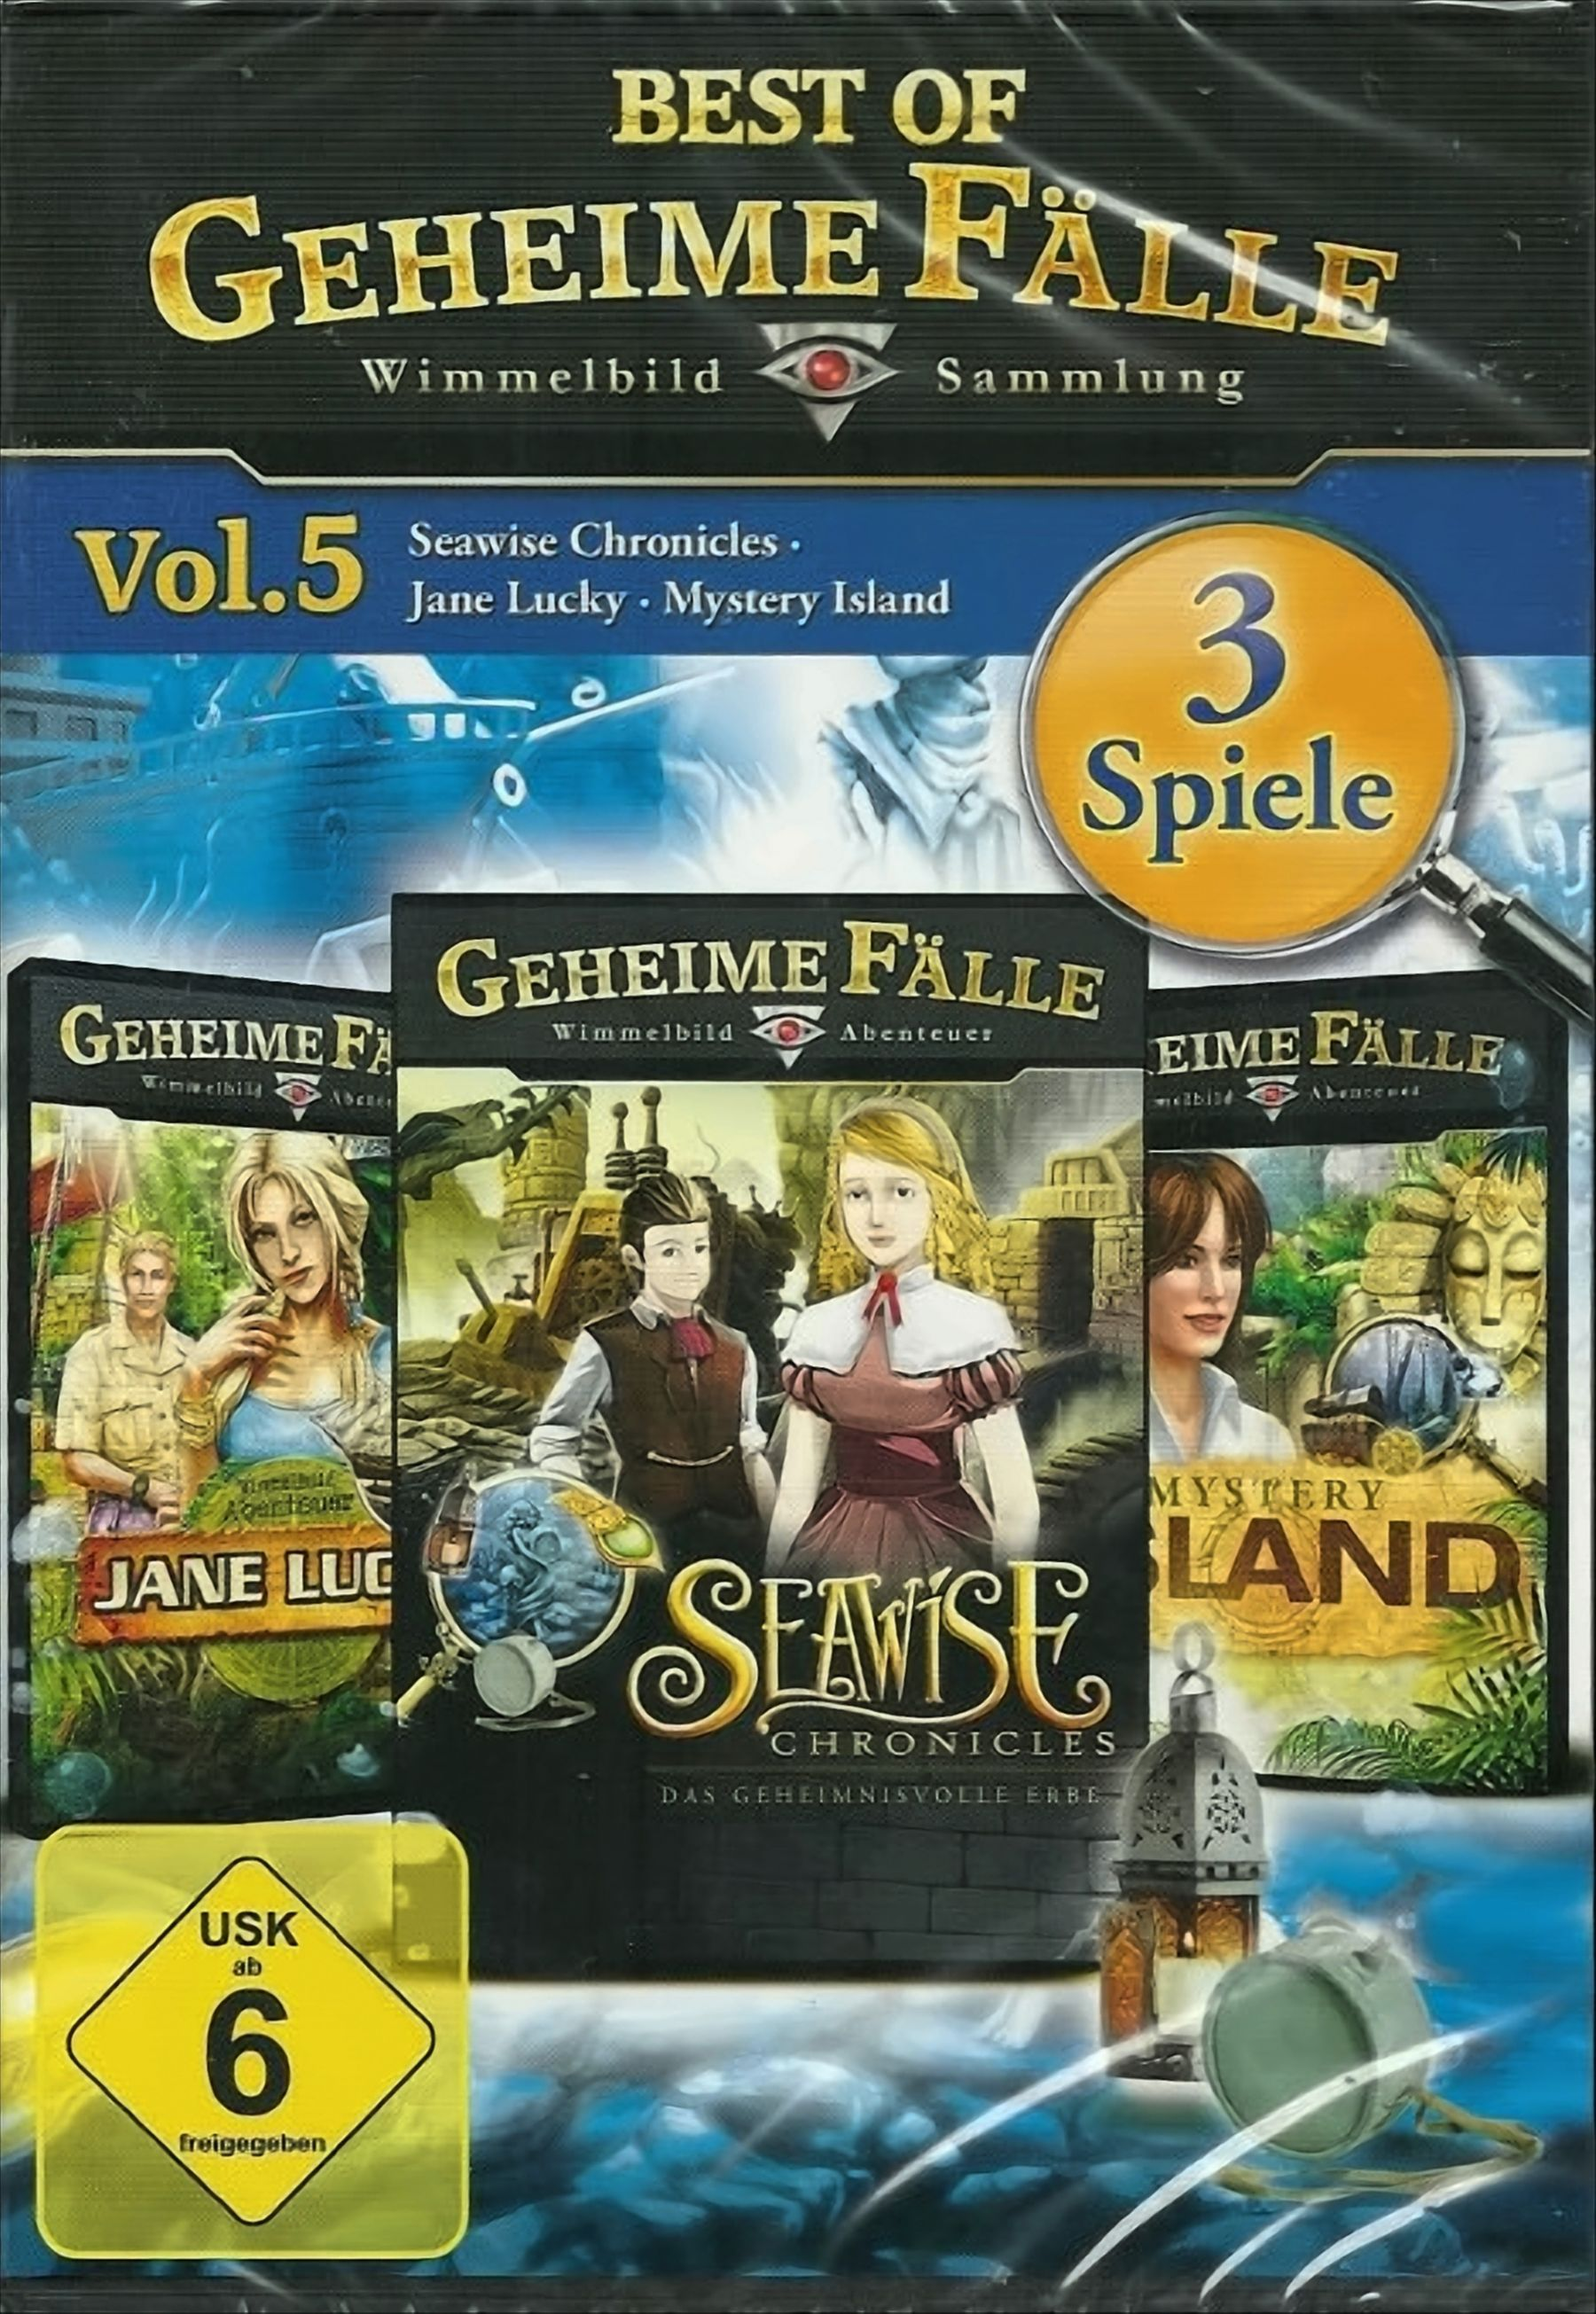 - Vol. BEST 5 OF Fälle [PC] Geheime